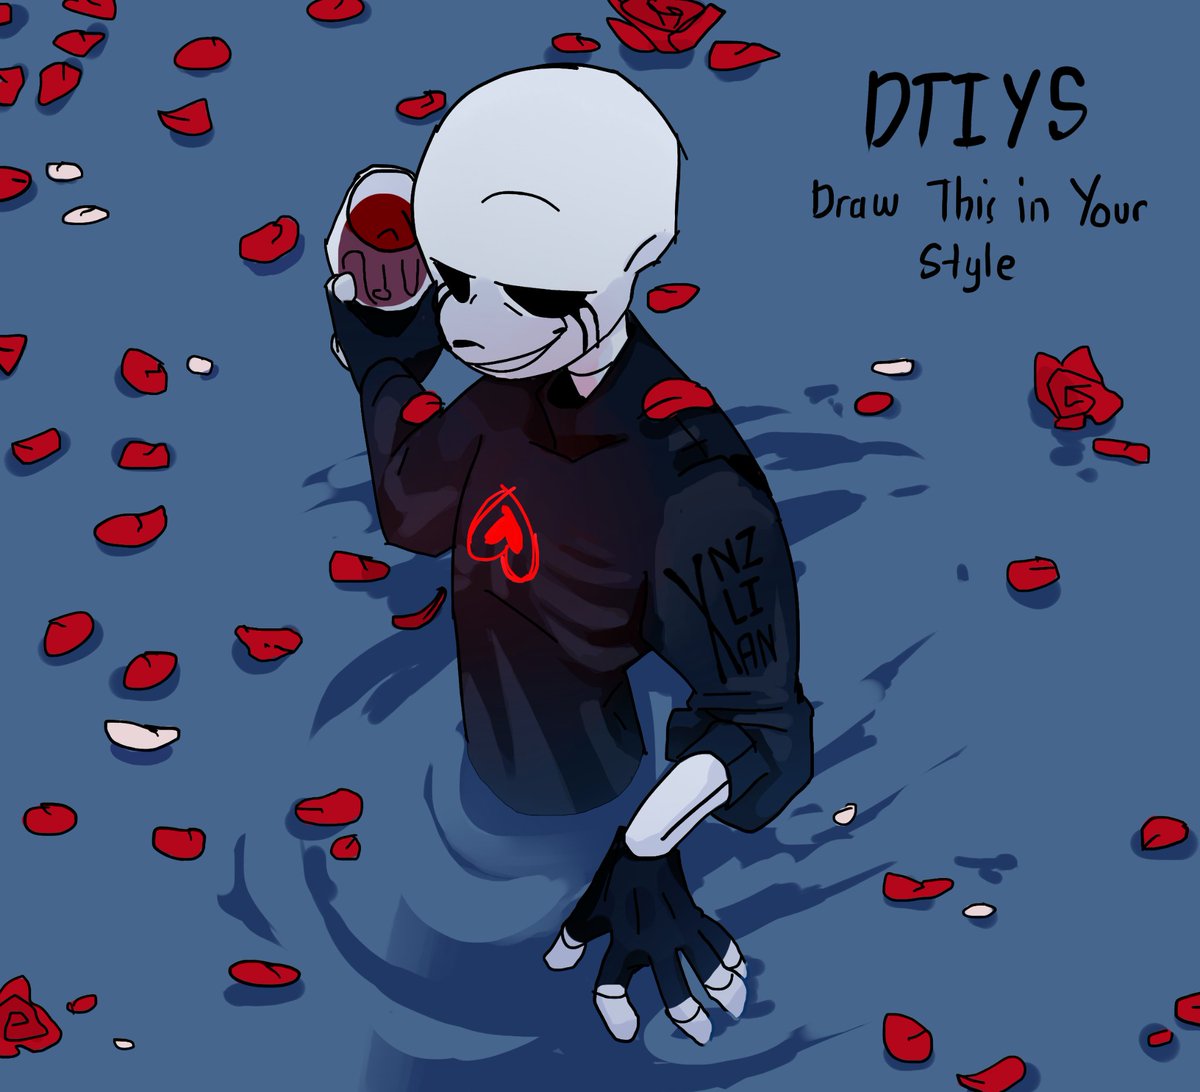 Killer dtiys :D

Rules:
• Different perspectives are allowed! As long as it resembles the original.
• use the hashtag #xnzliandtiys and tag me as well!
• This is not a contest! Have fun! 

Killer belongs to RahafWabas